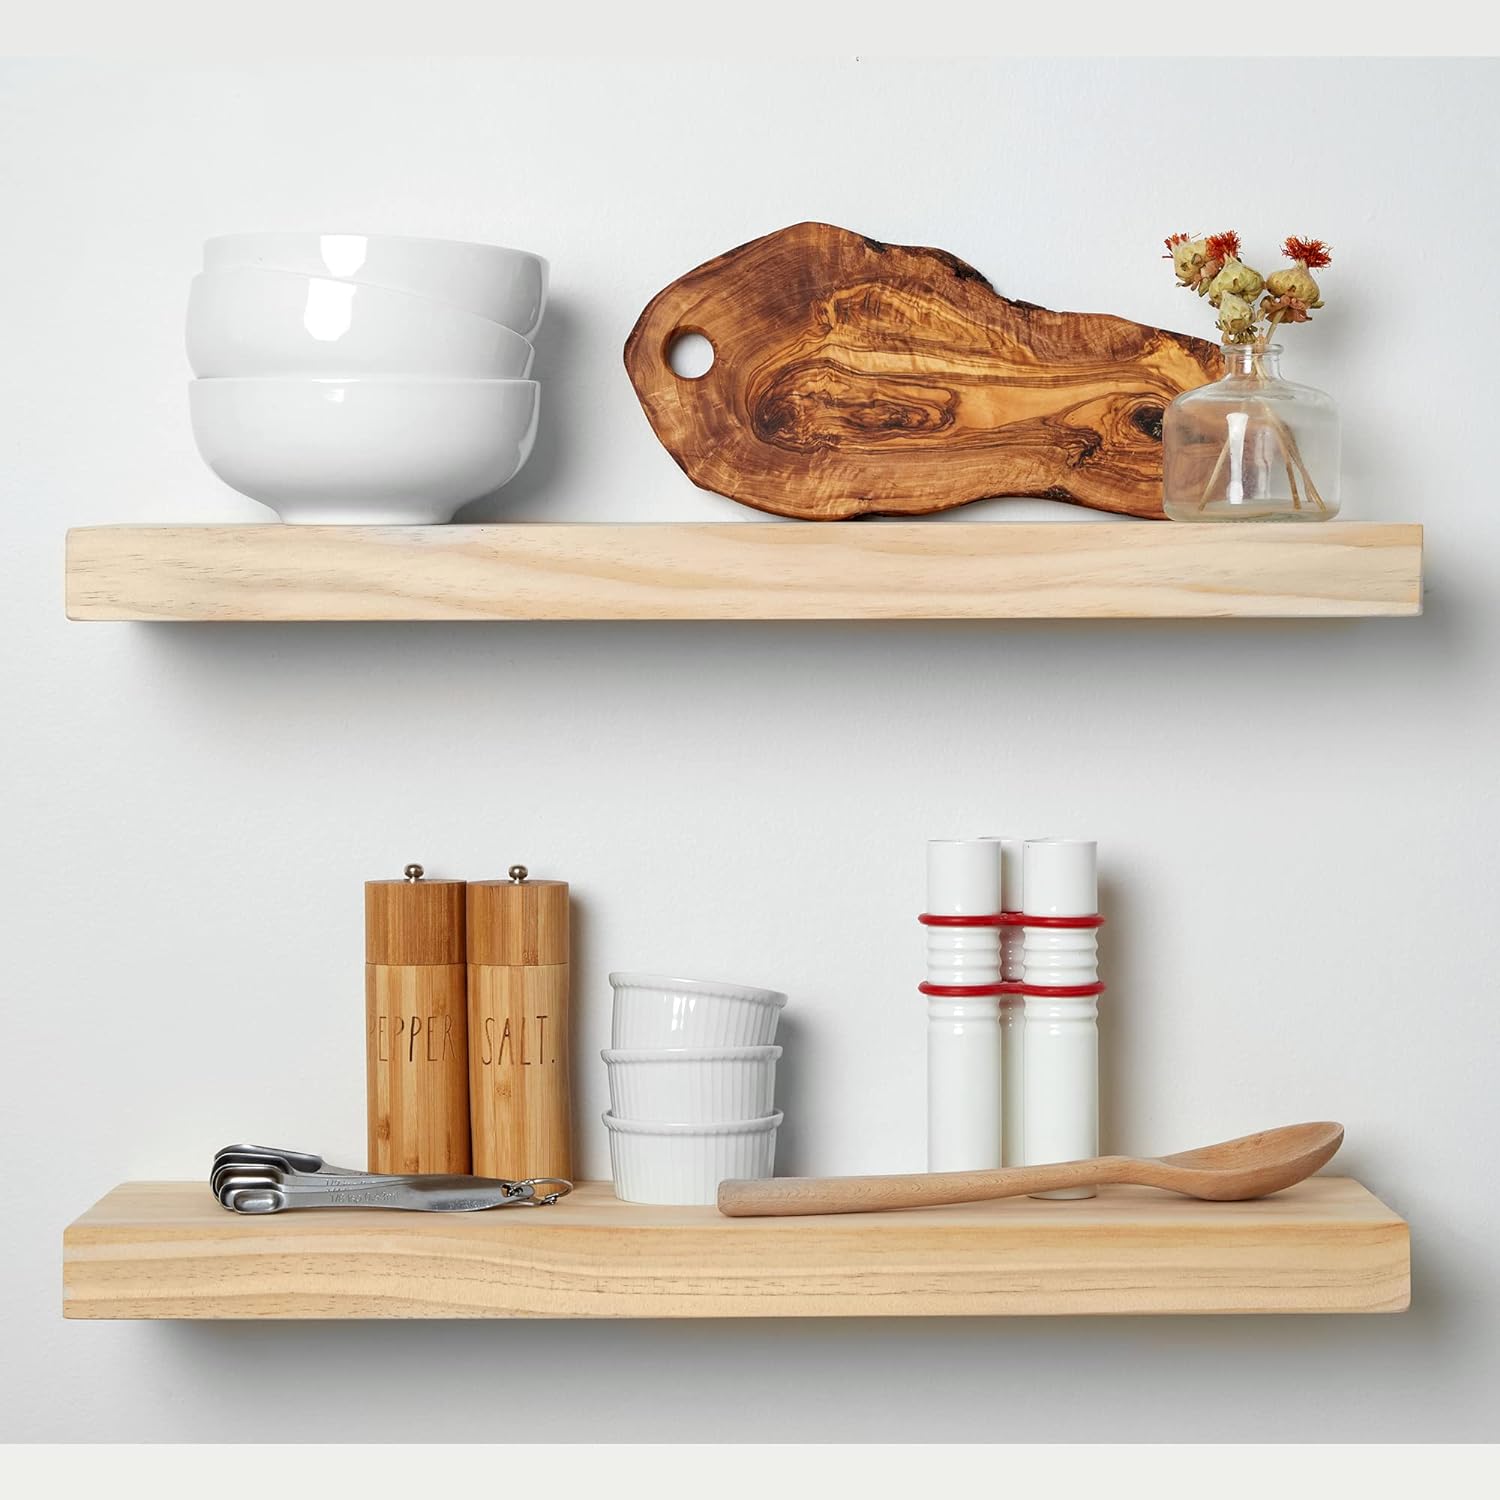 8 Small Kitchen Storage Ideas You’ll Wish You Knew Sooner